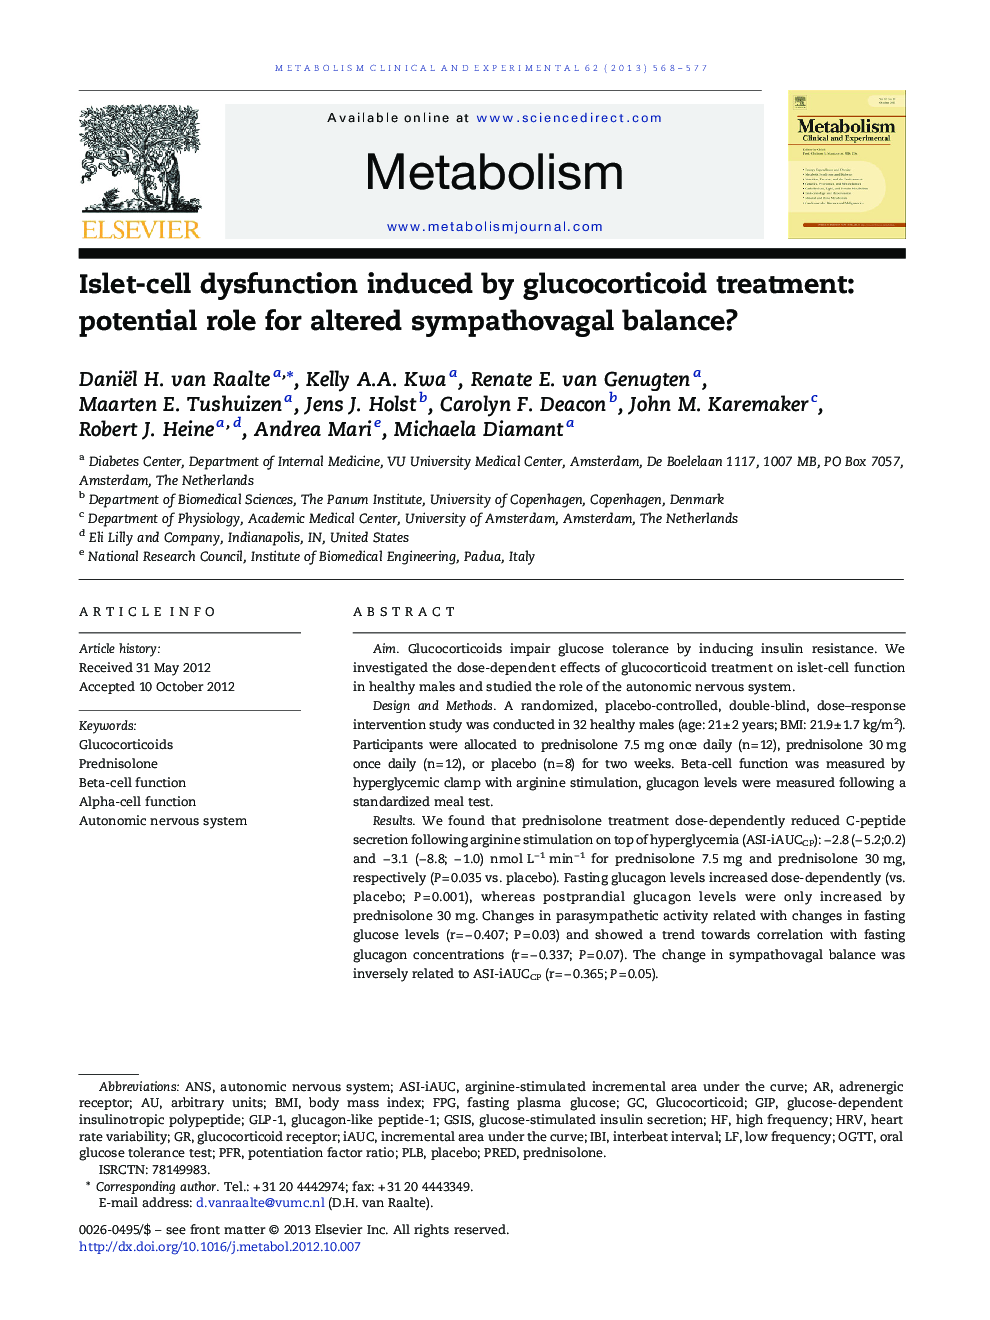 Islet-cell dysfunction induced by glucocorticoid treatment: potential role for altered sympathovagal balance? 